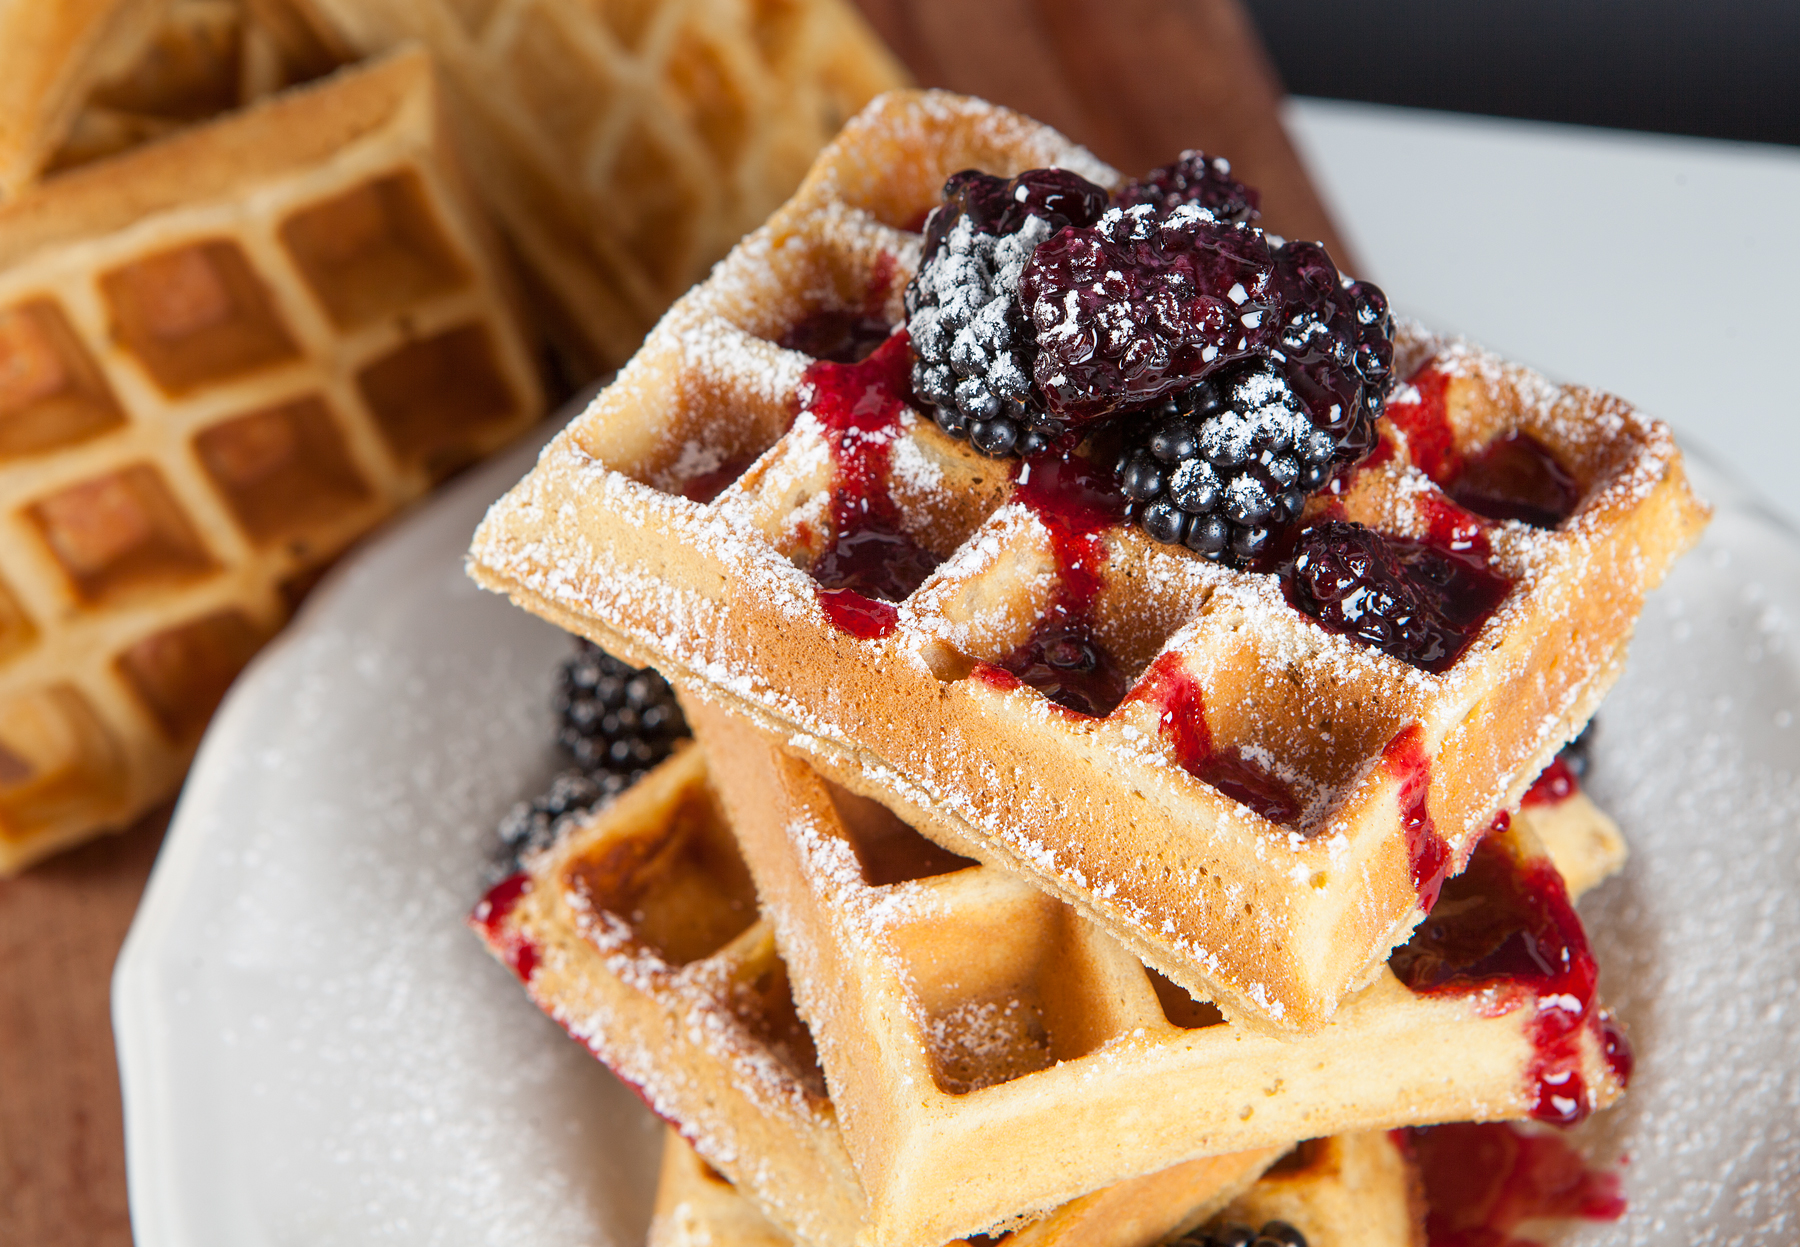 Peanut Butter Waffles and Blackberry Gose Syrup